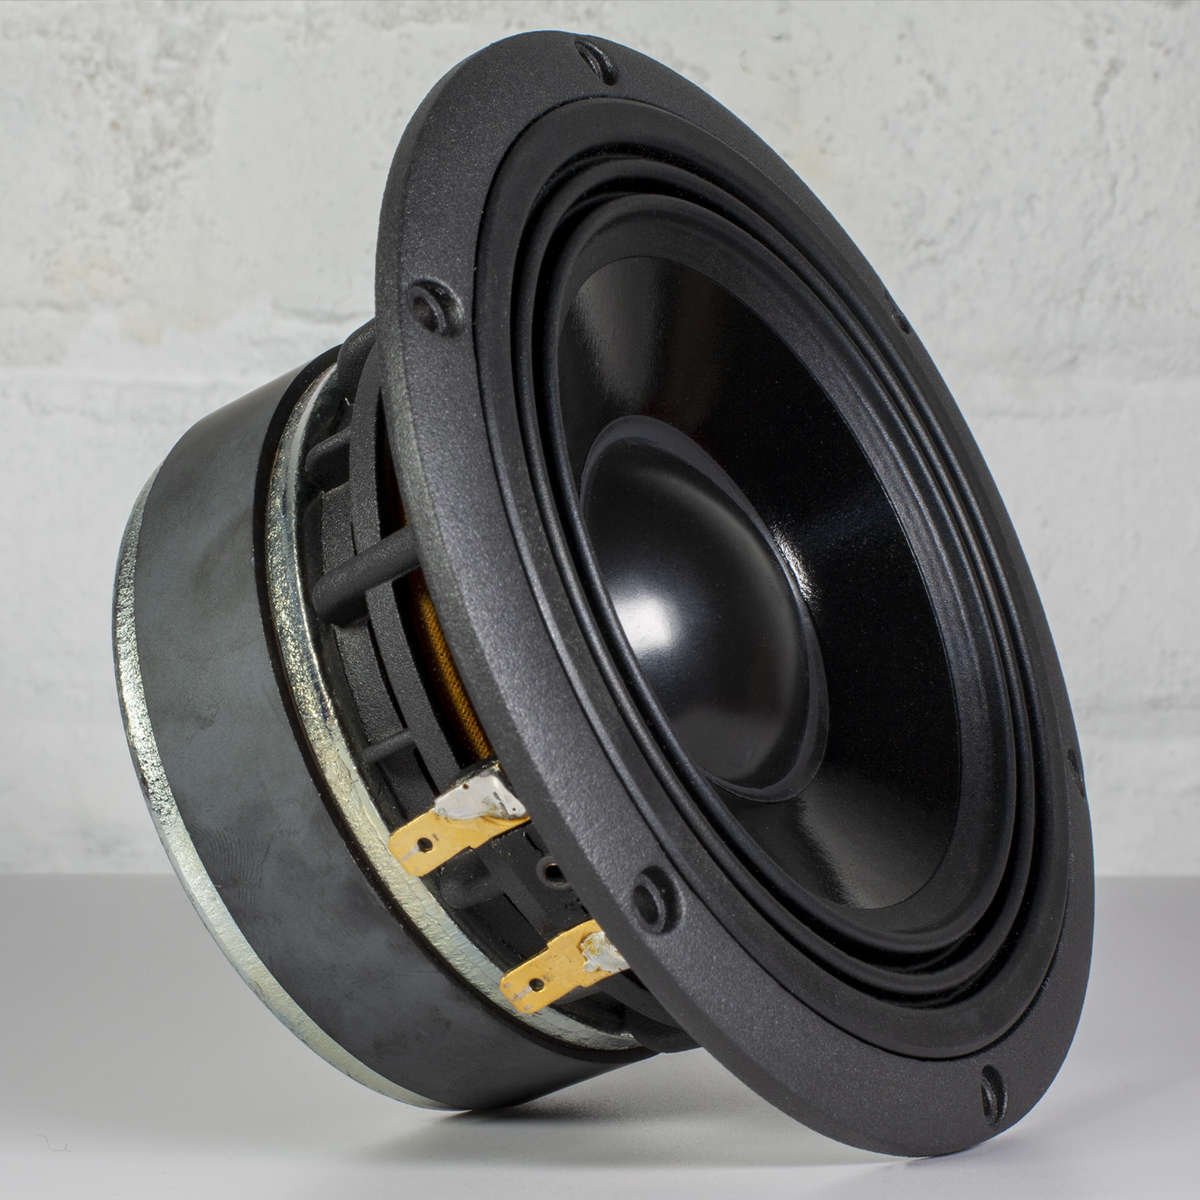 The speakers that go inside of the Ashdown nfp 2 pro studio monitor